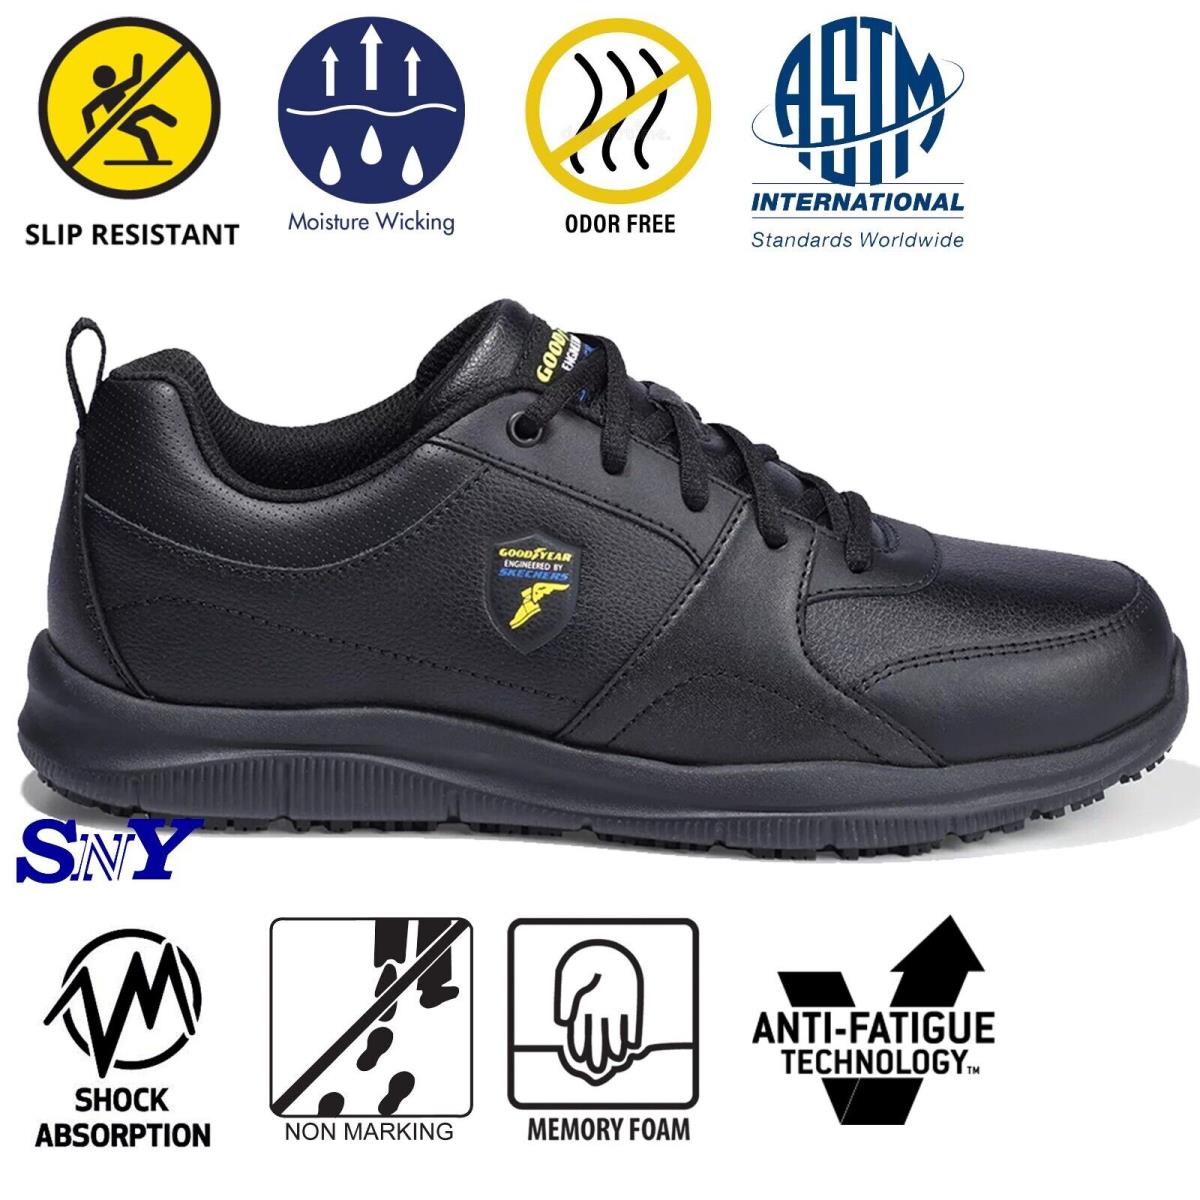 Skechers Goodyear Men`s Slip-resistant Lightweight Service Shoes Astm Rated